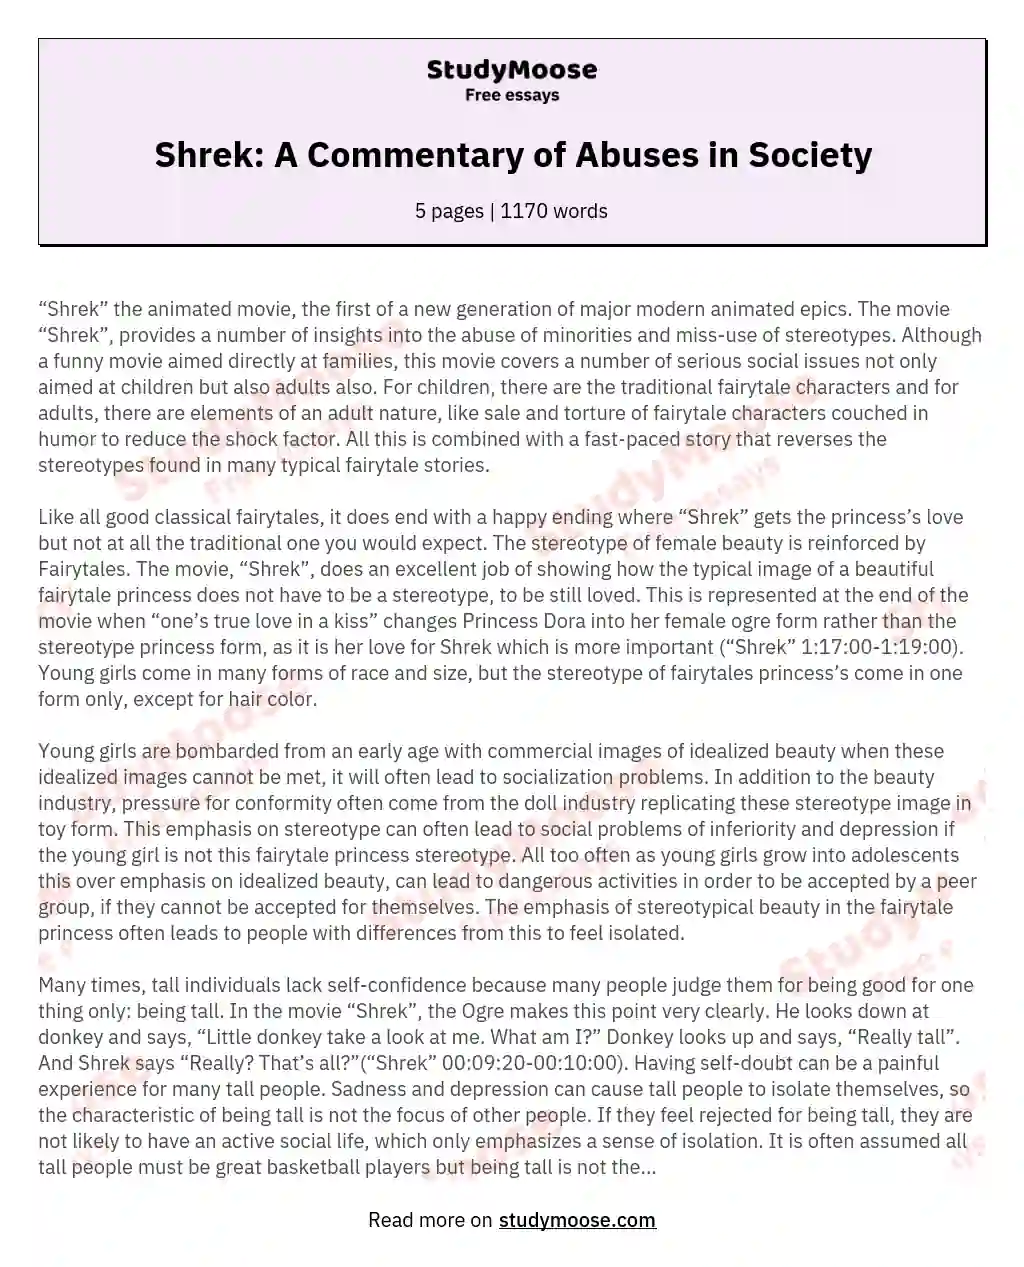 Shrek: A Commentary of Abuses in Society essay